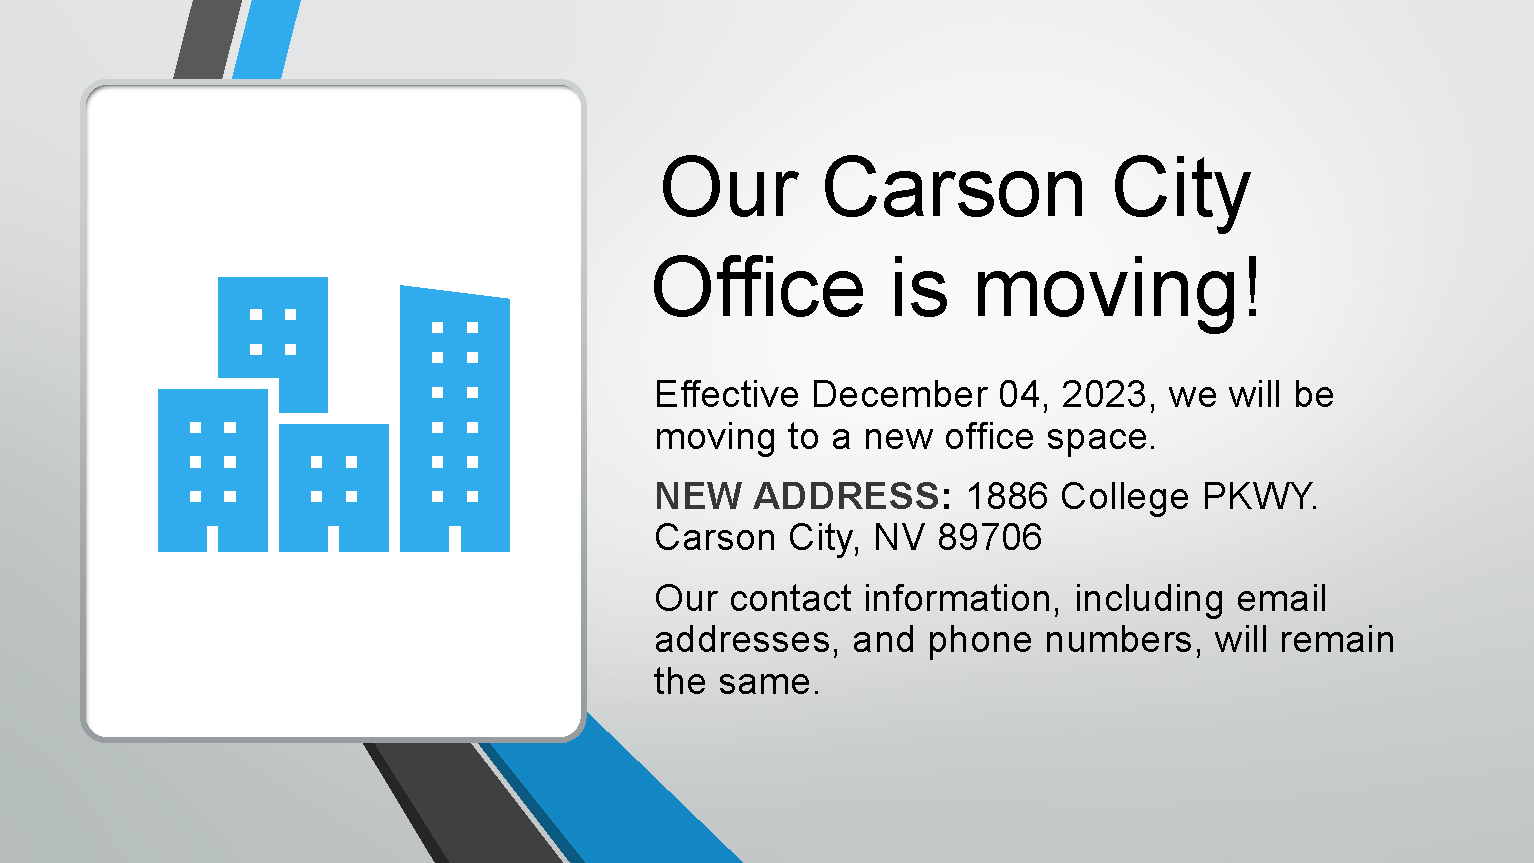 Our Carson City Office is moving!